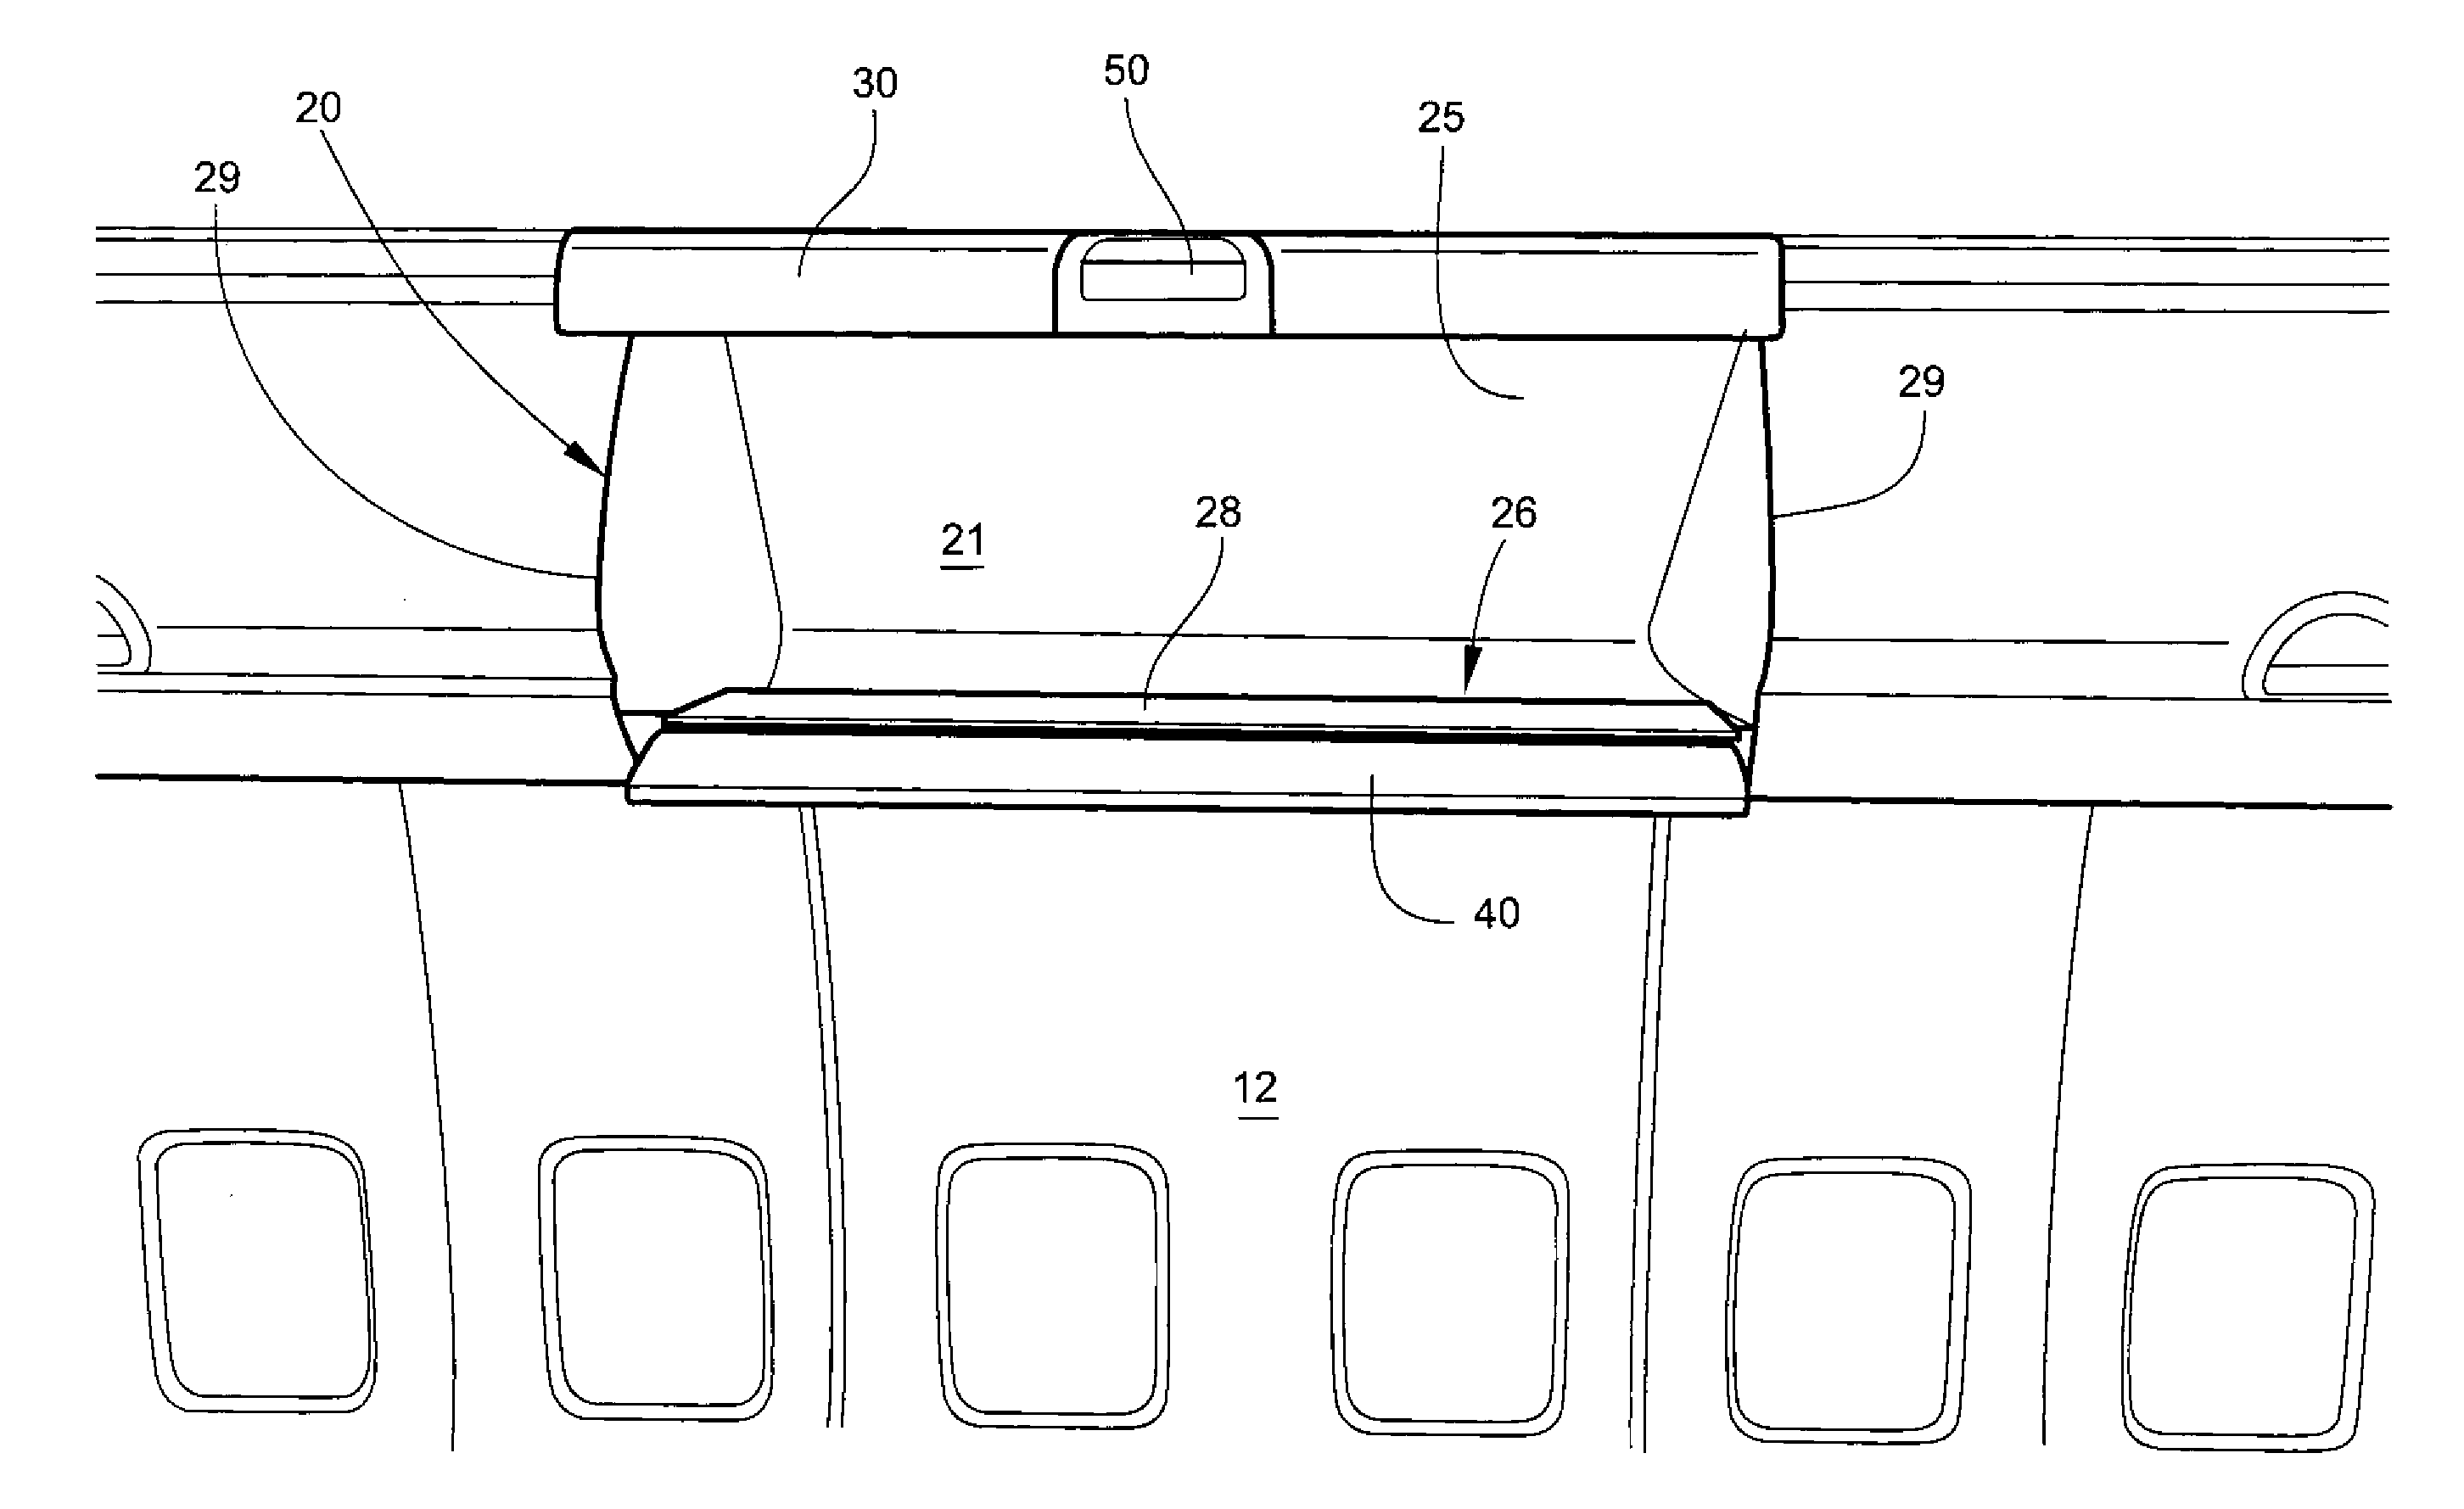 Overhead luggage bin for aircraft interior